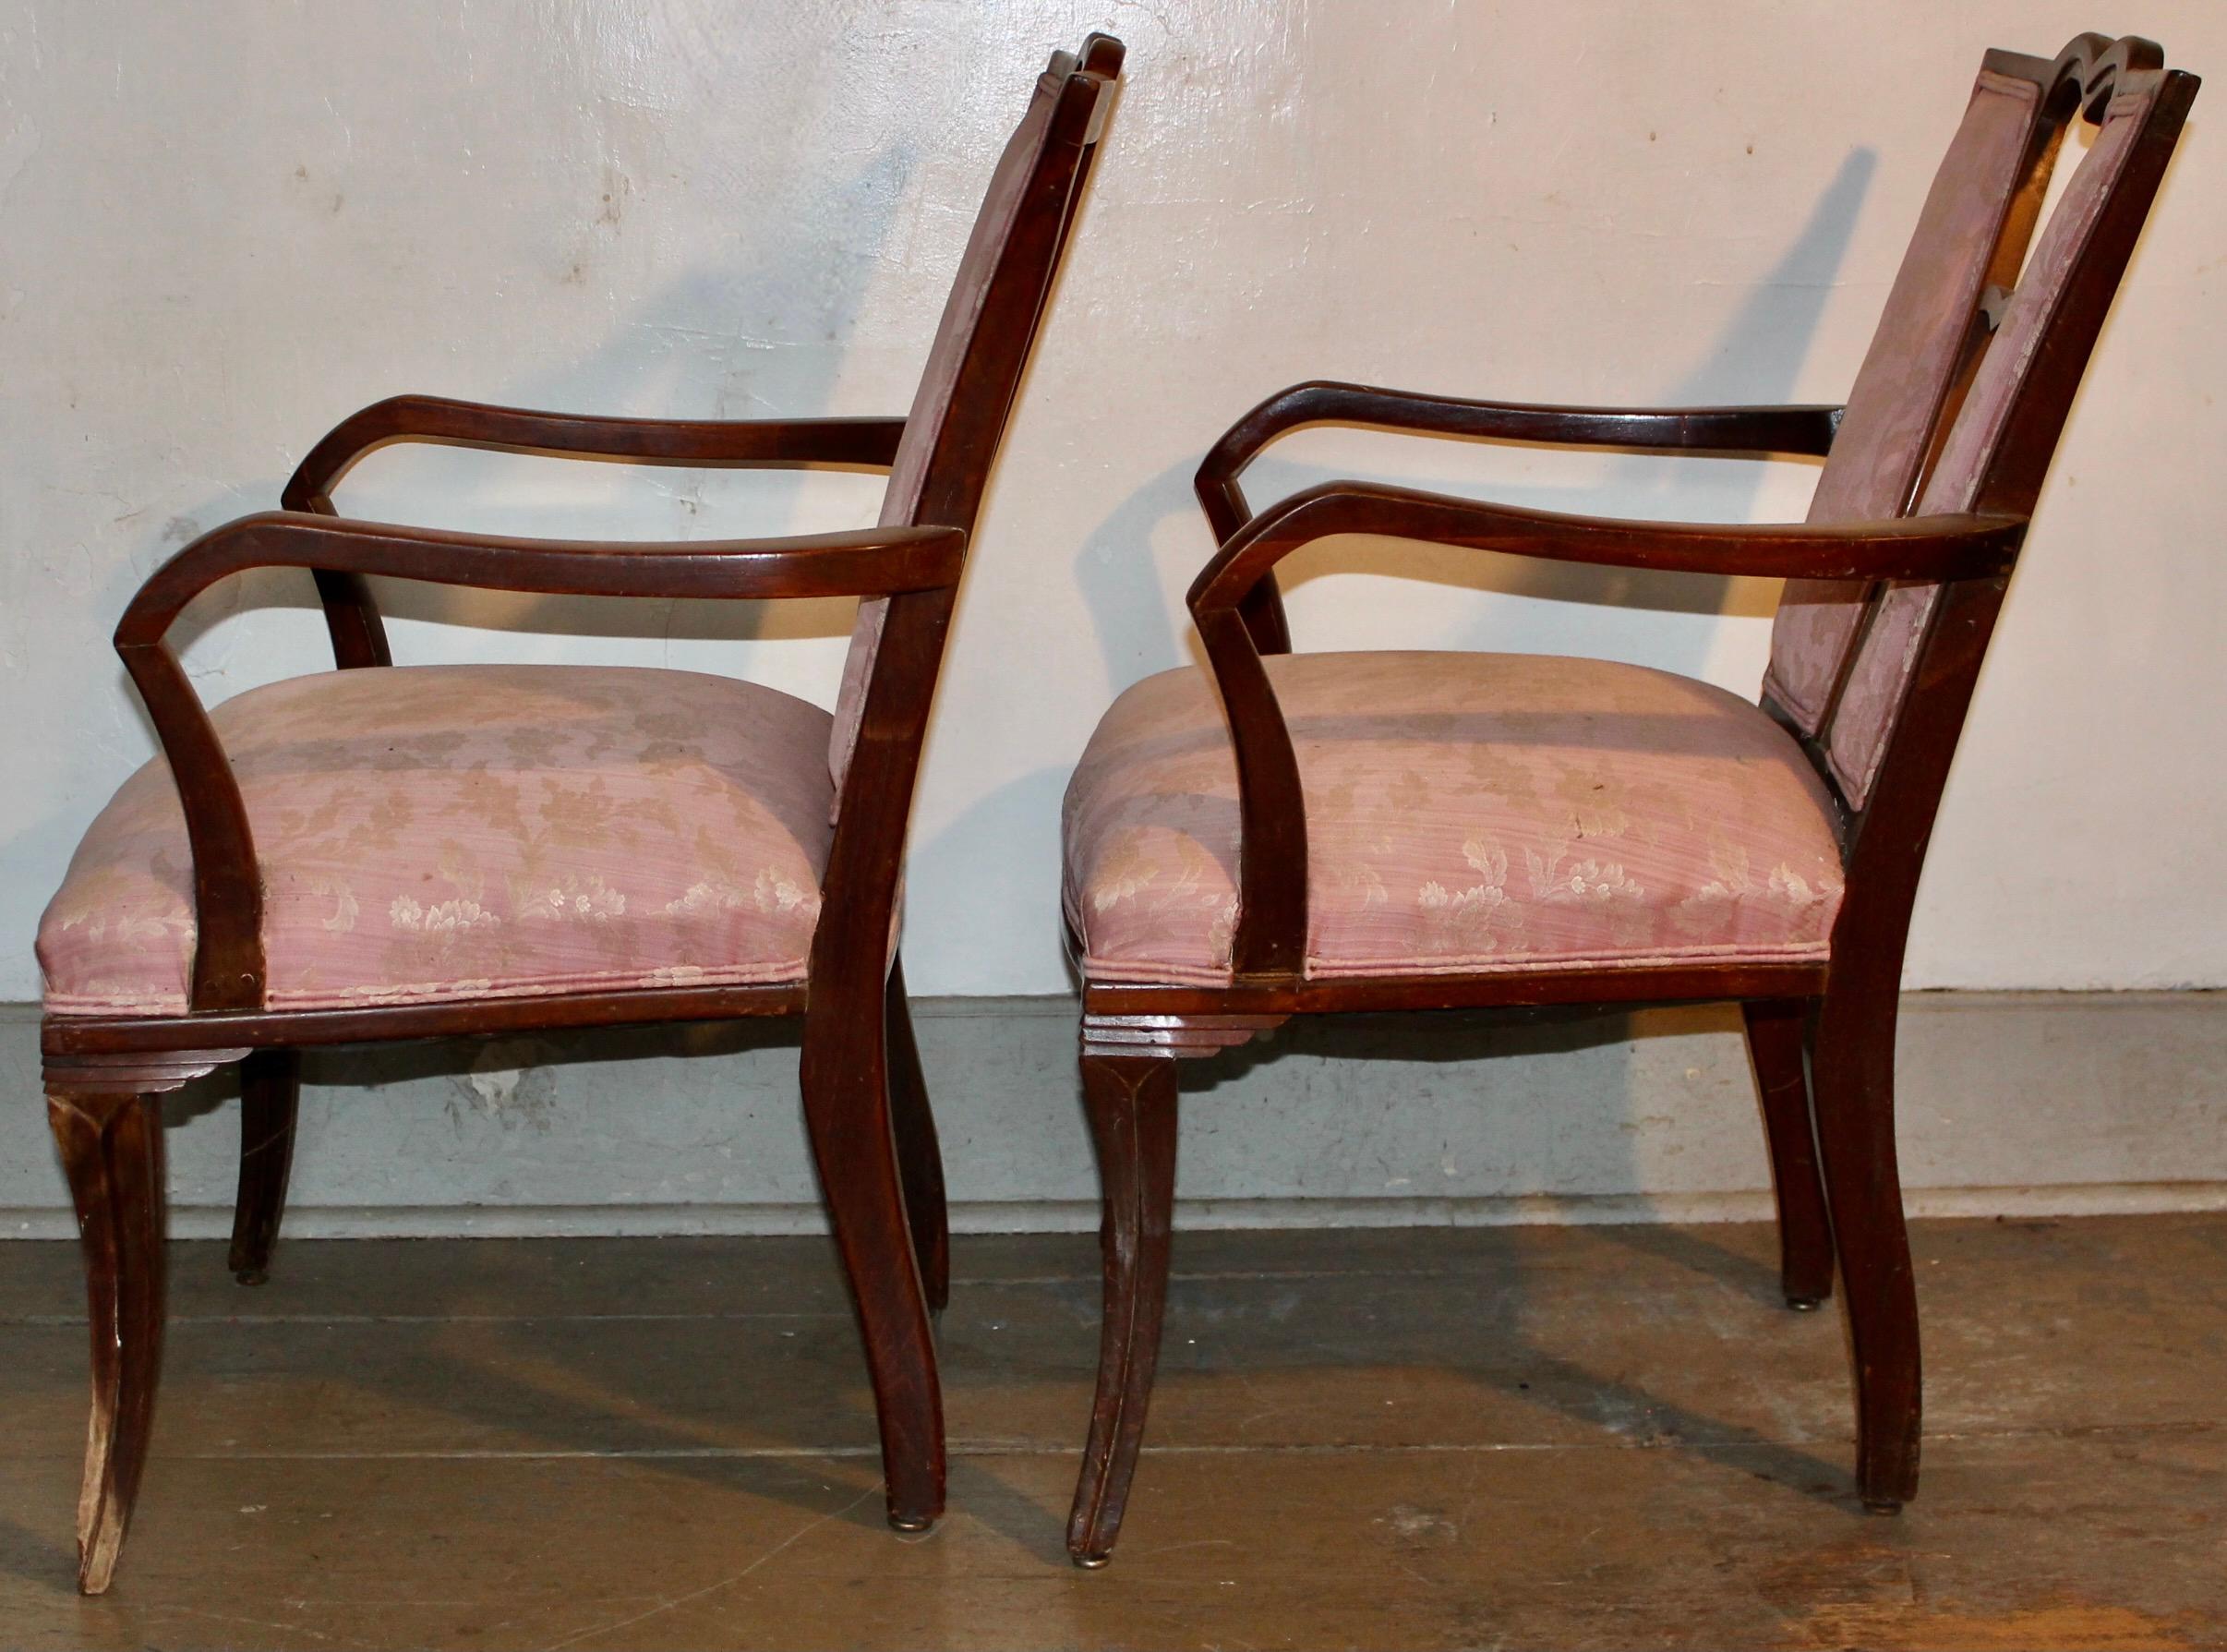 Hand-Carved Eugene Schoen Pair Armchairs by Schmieg Hungate and Kotzian c.1929 For Sale